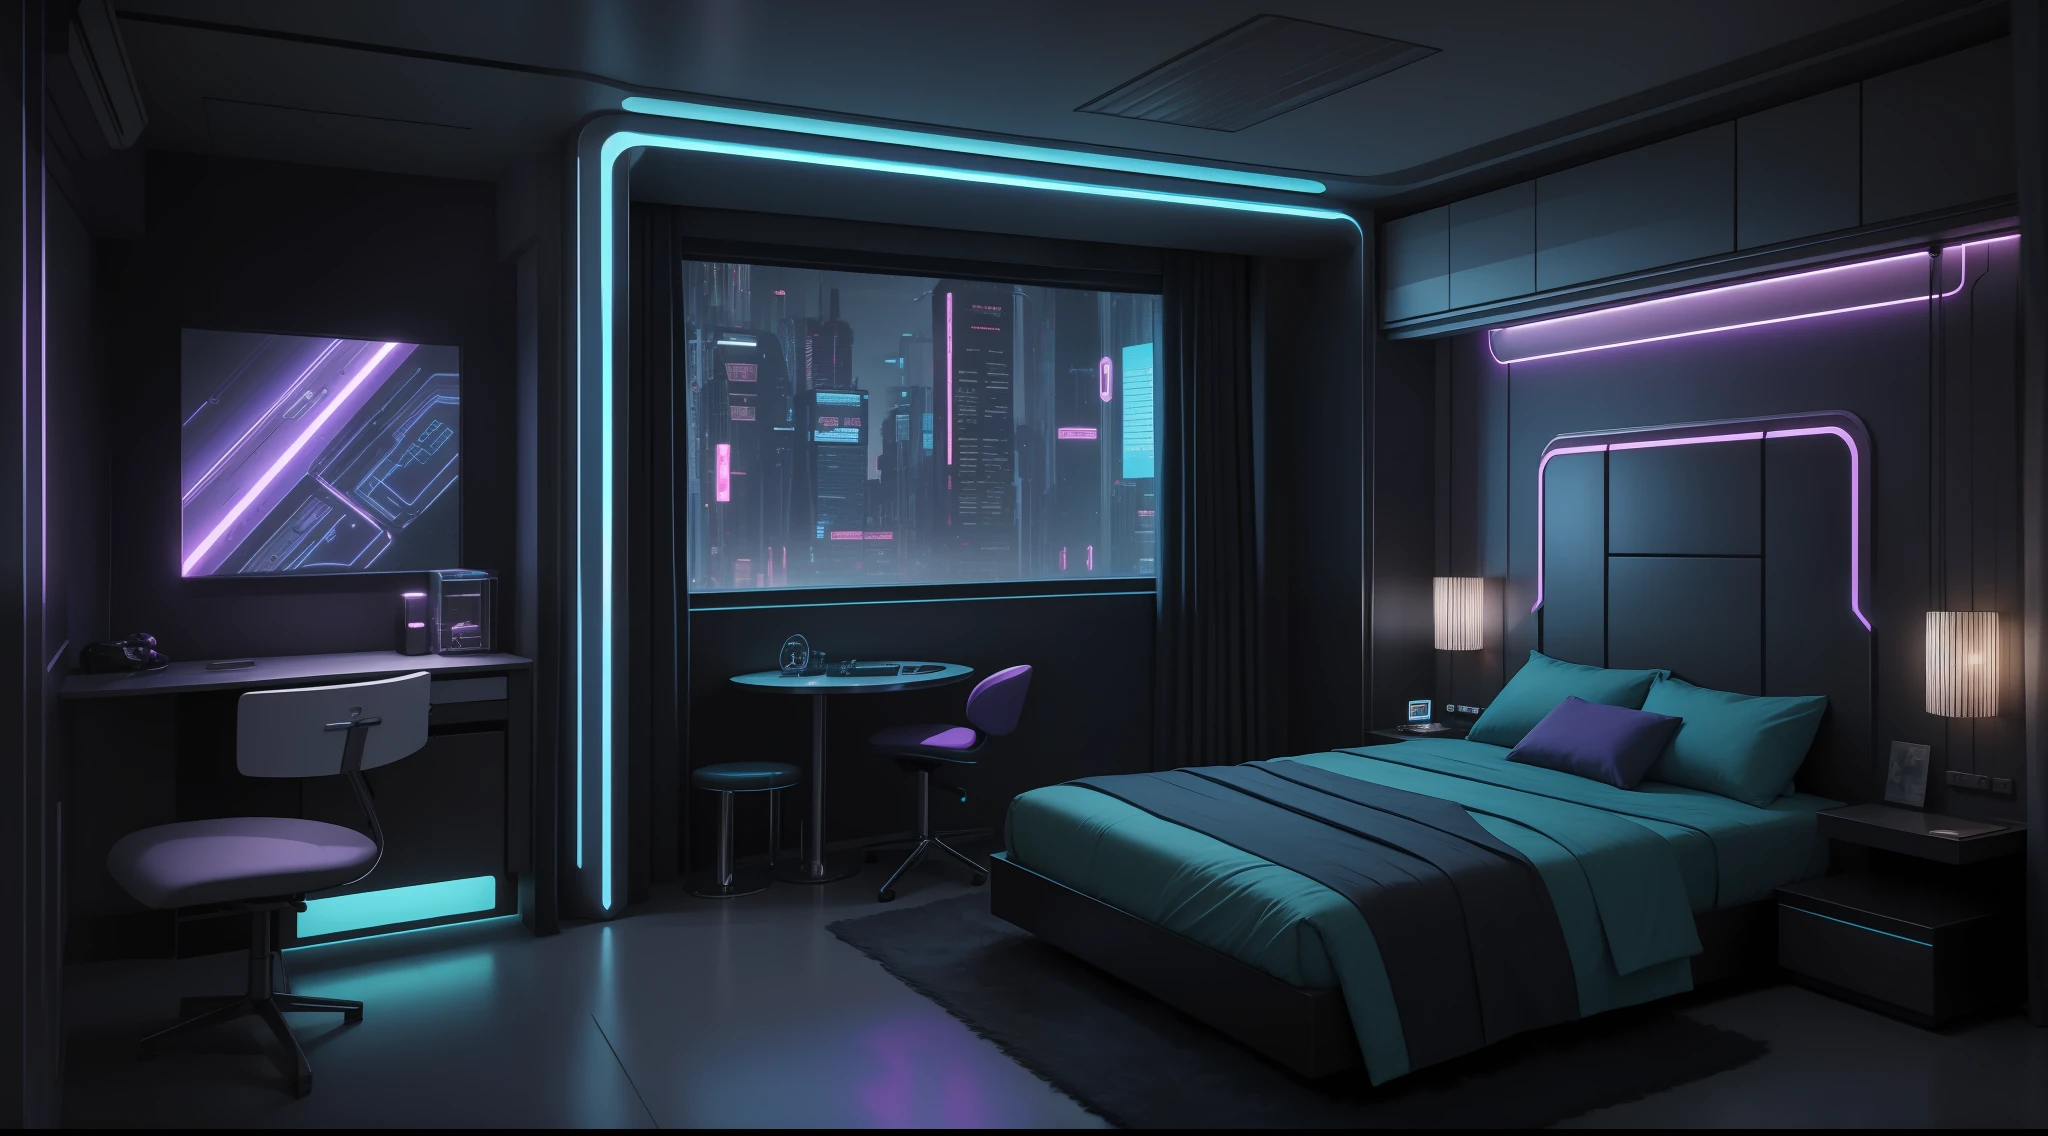 there is a bedroom with a bed and a chair in it, futuristic room, futuristic room background, cozy 9 0 s bedroom retrofuturism, futuristic decor, retro futuristic apartment, futuristic interior, cyberpunk teenager bedroom, galaxy themed room, futuristic decoration, cyberpunk childrens bedroom, cyberpunk apartment, futuristic ambiance, the cyberpunk apartment, in a cyberpunk themed room, futuristic looking living room